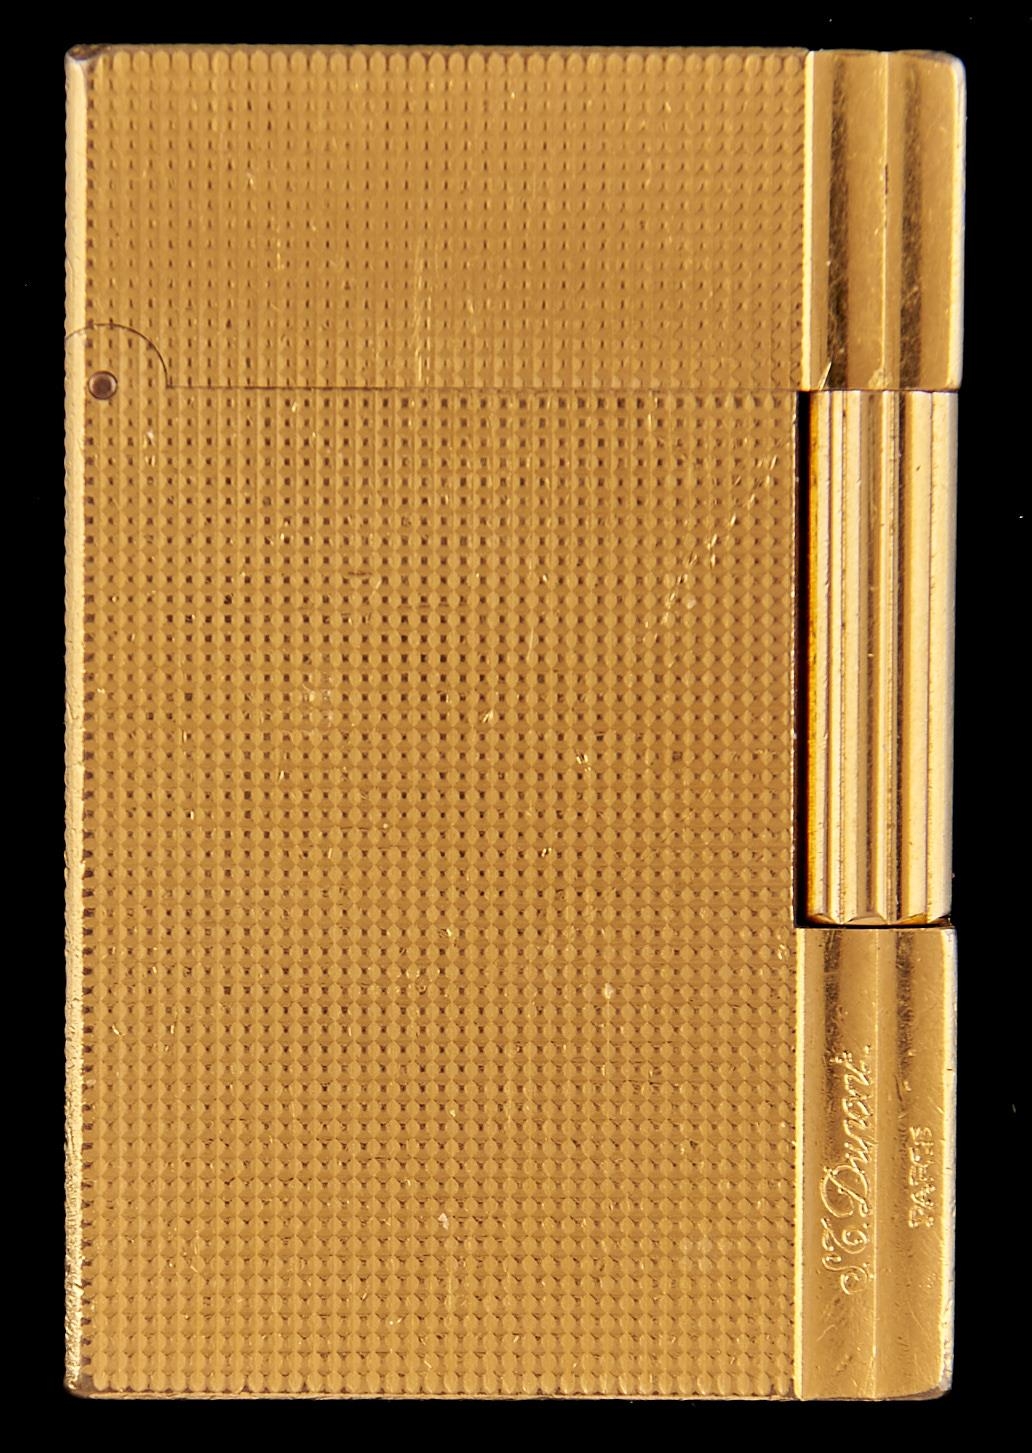 An S T Dupont gold plated cigarette lighter, No 11GTR05, cased Slight signs of use consistent with